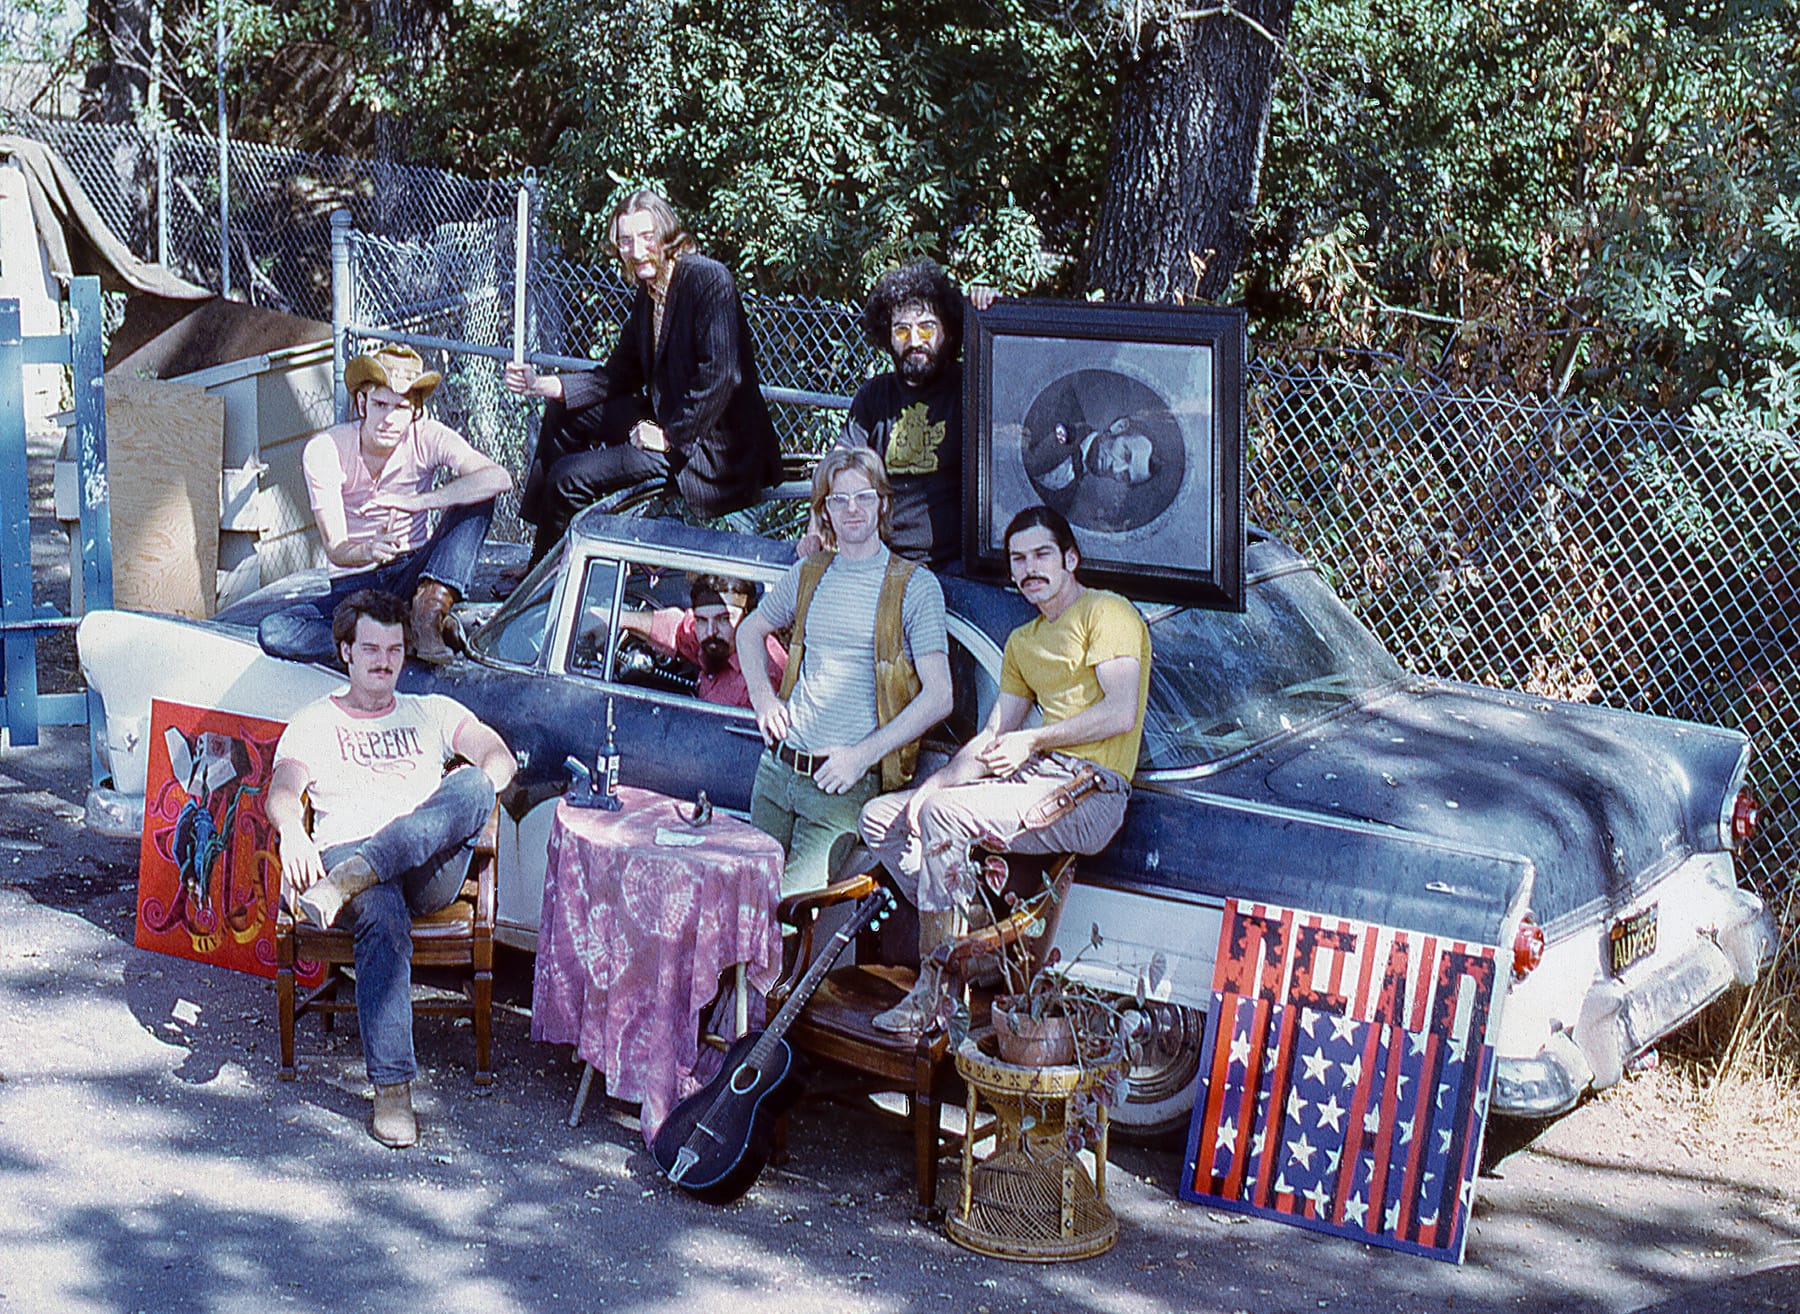 “Look How Many Of US There Are”: Rosie McGee on Her Grateful Dead Photo Book and the Legacy of The Human Be-In